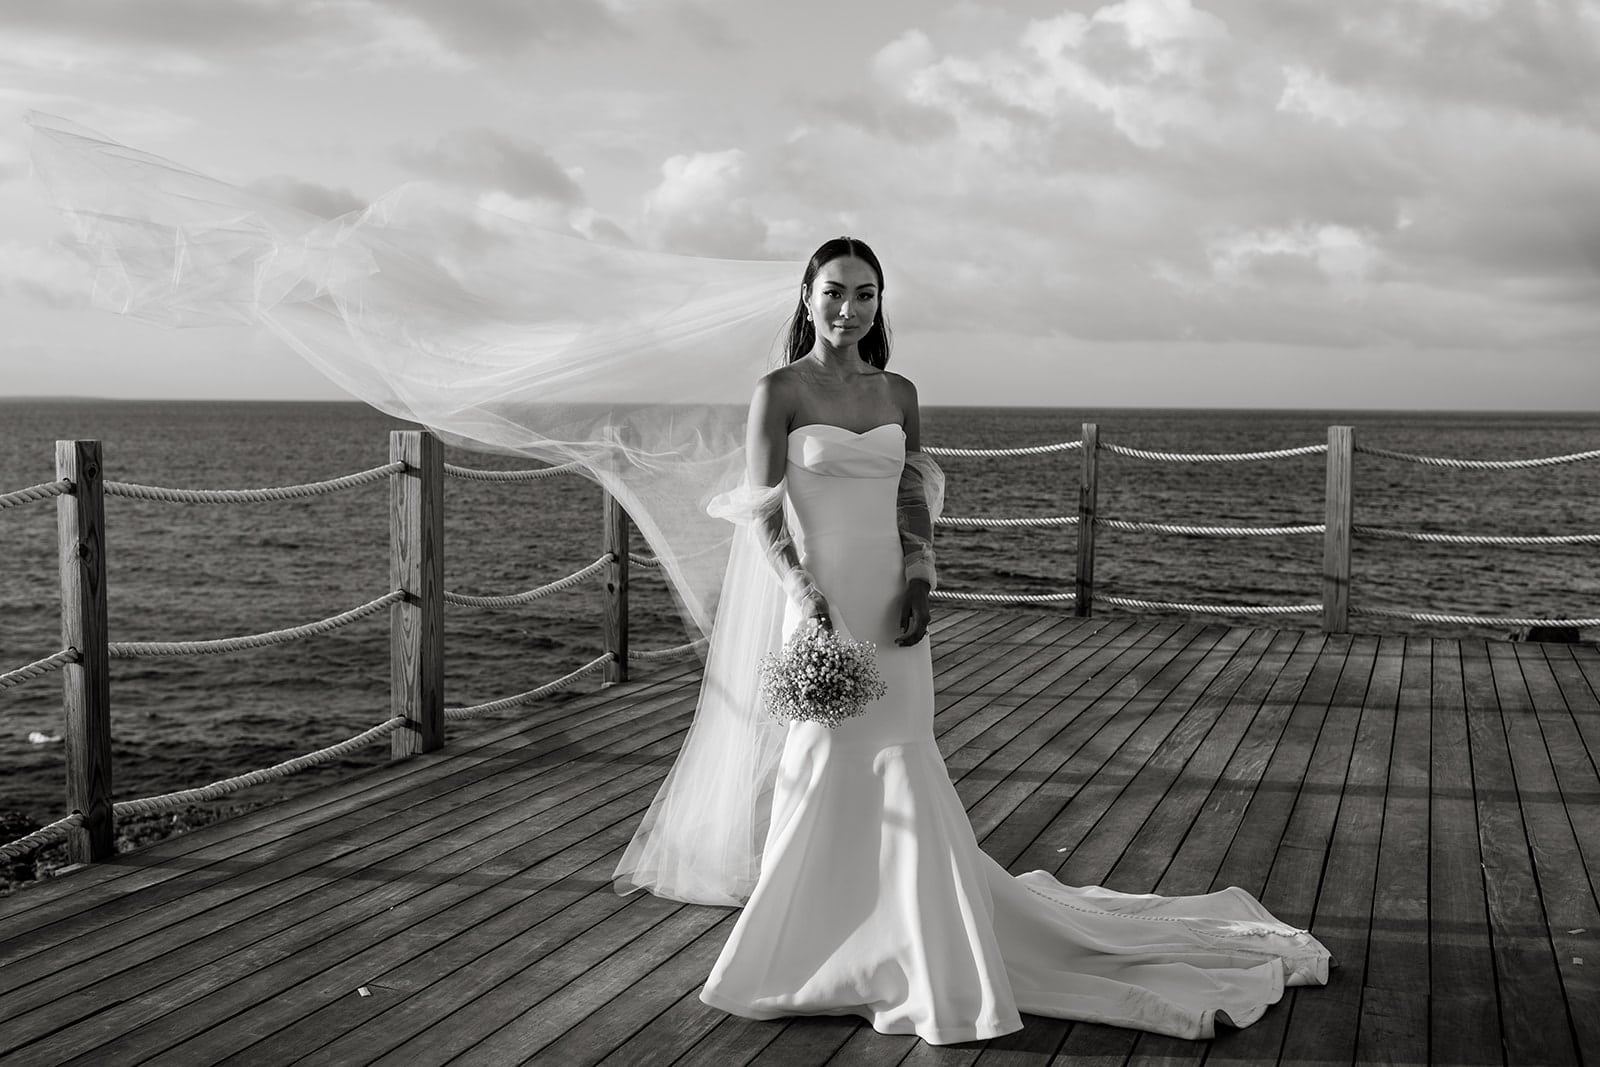 Bridal portrait with bride on dock in Anguilla while veil blows in the wind